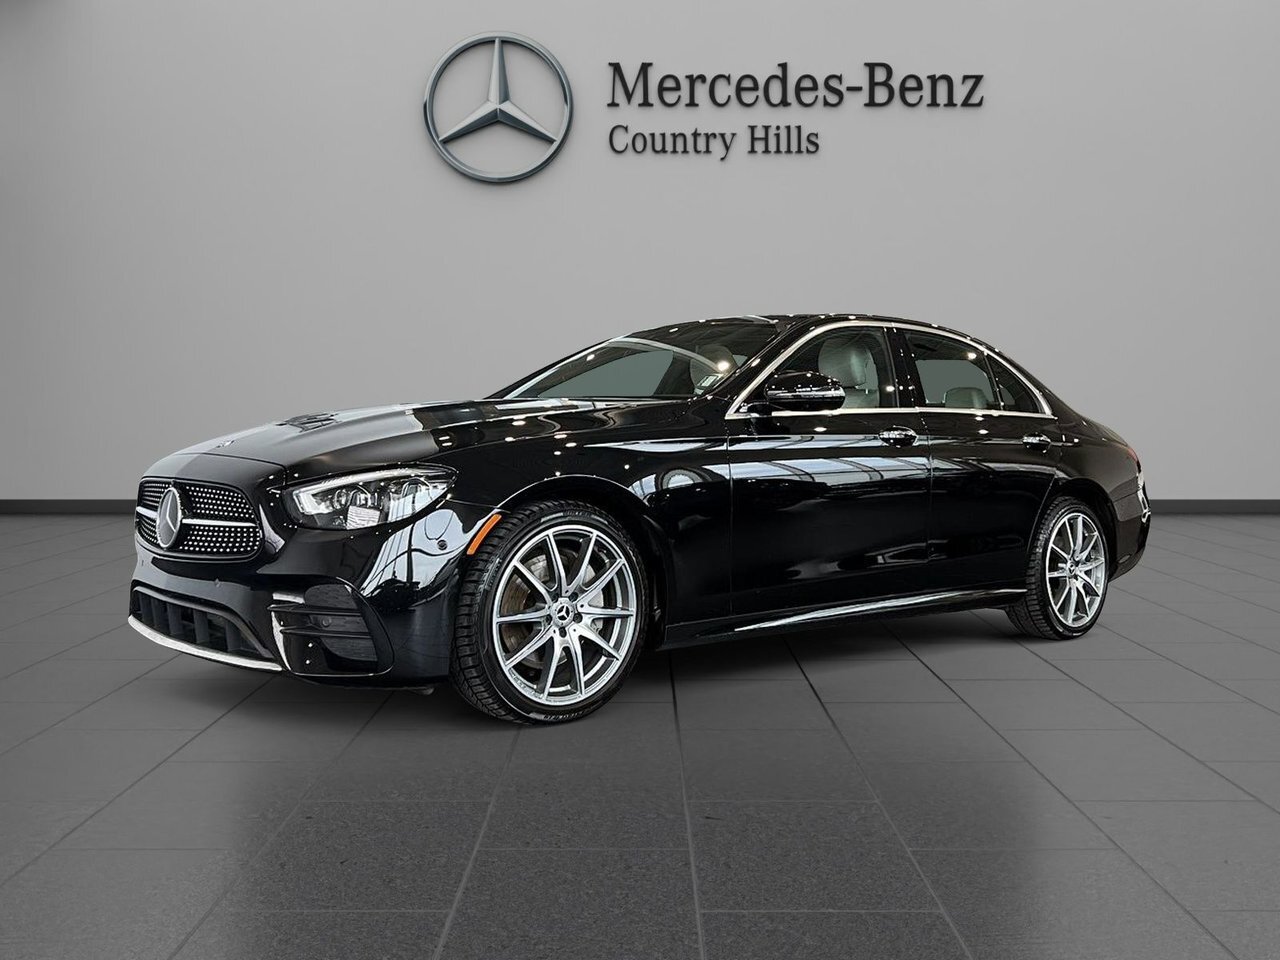 2021 Mercedes-Benz E350 4MATIC Sedan Highly equipped! Awesome value!